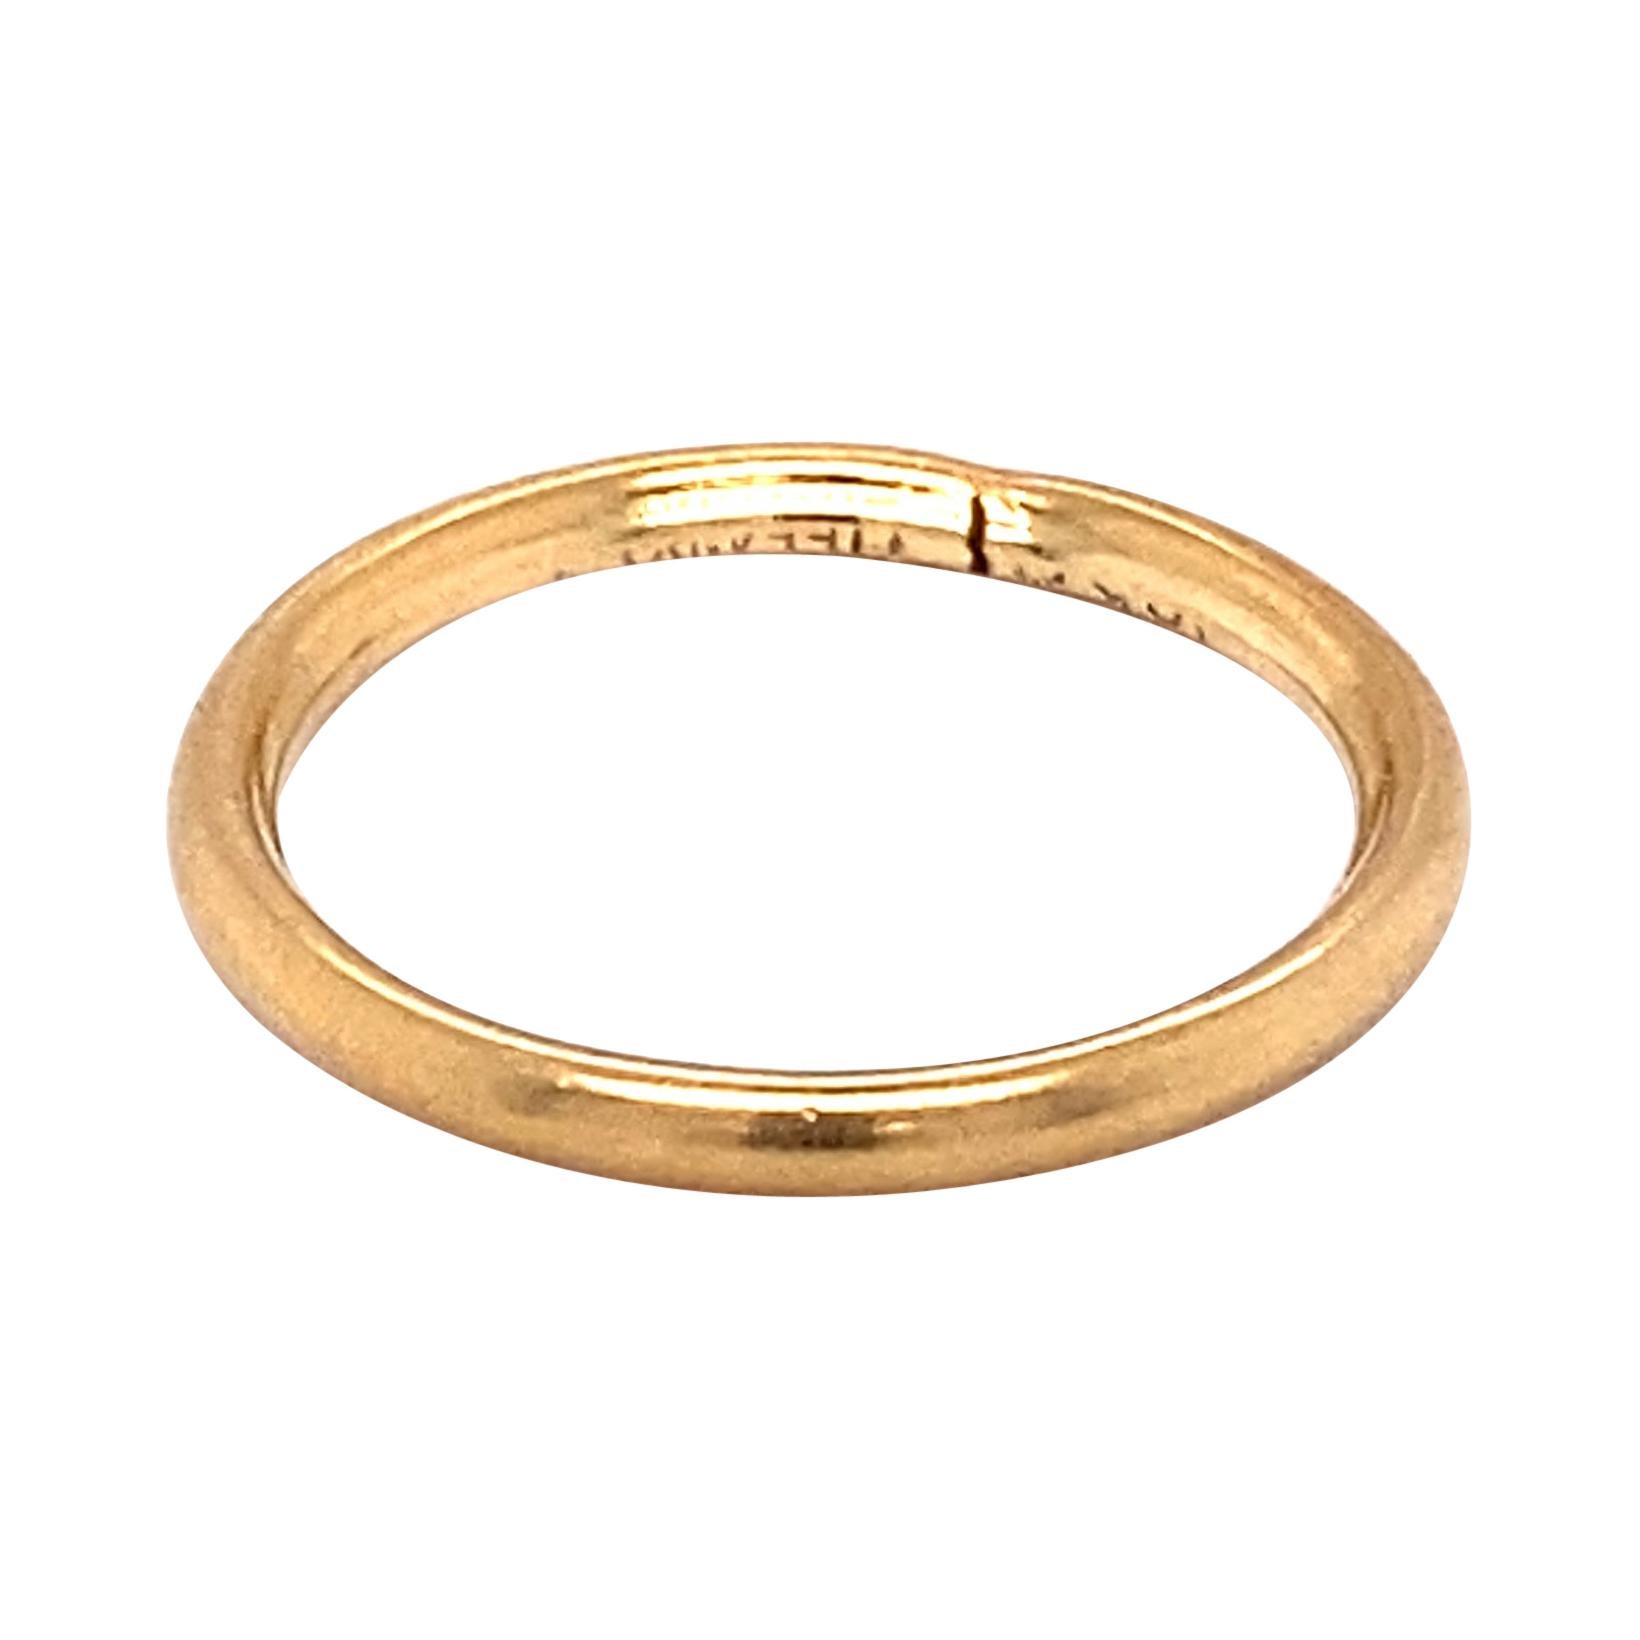 1930s Art Deco Tiffany & Co. 18 Karat Yellow Gold Band Ring For Sale